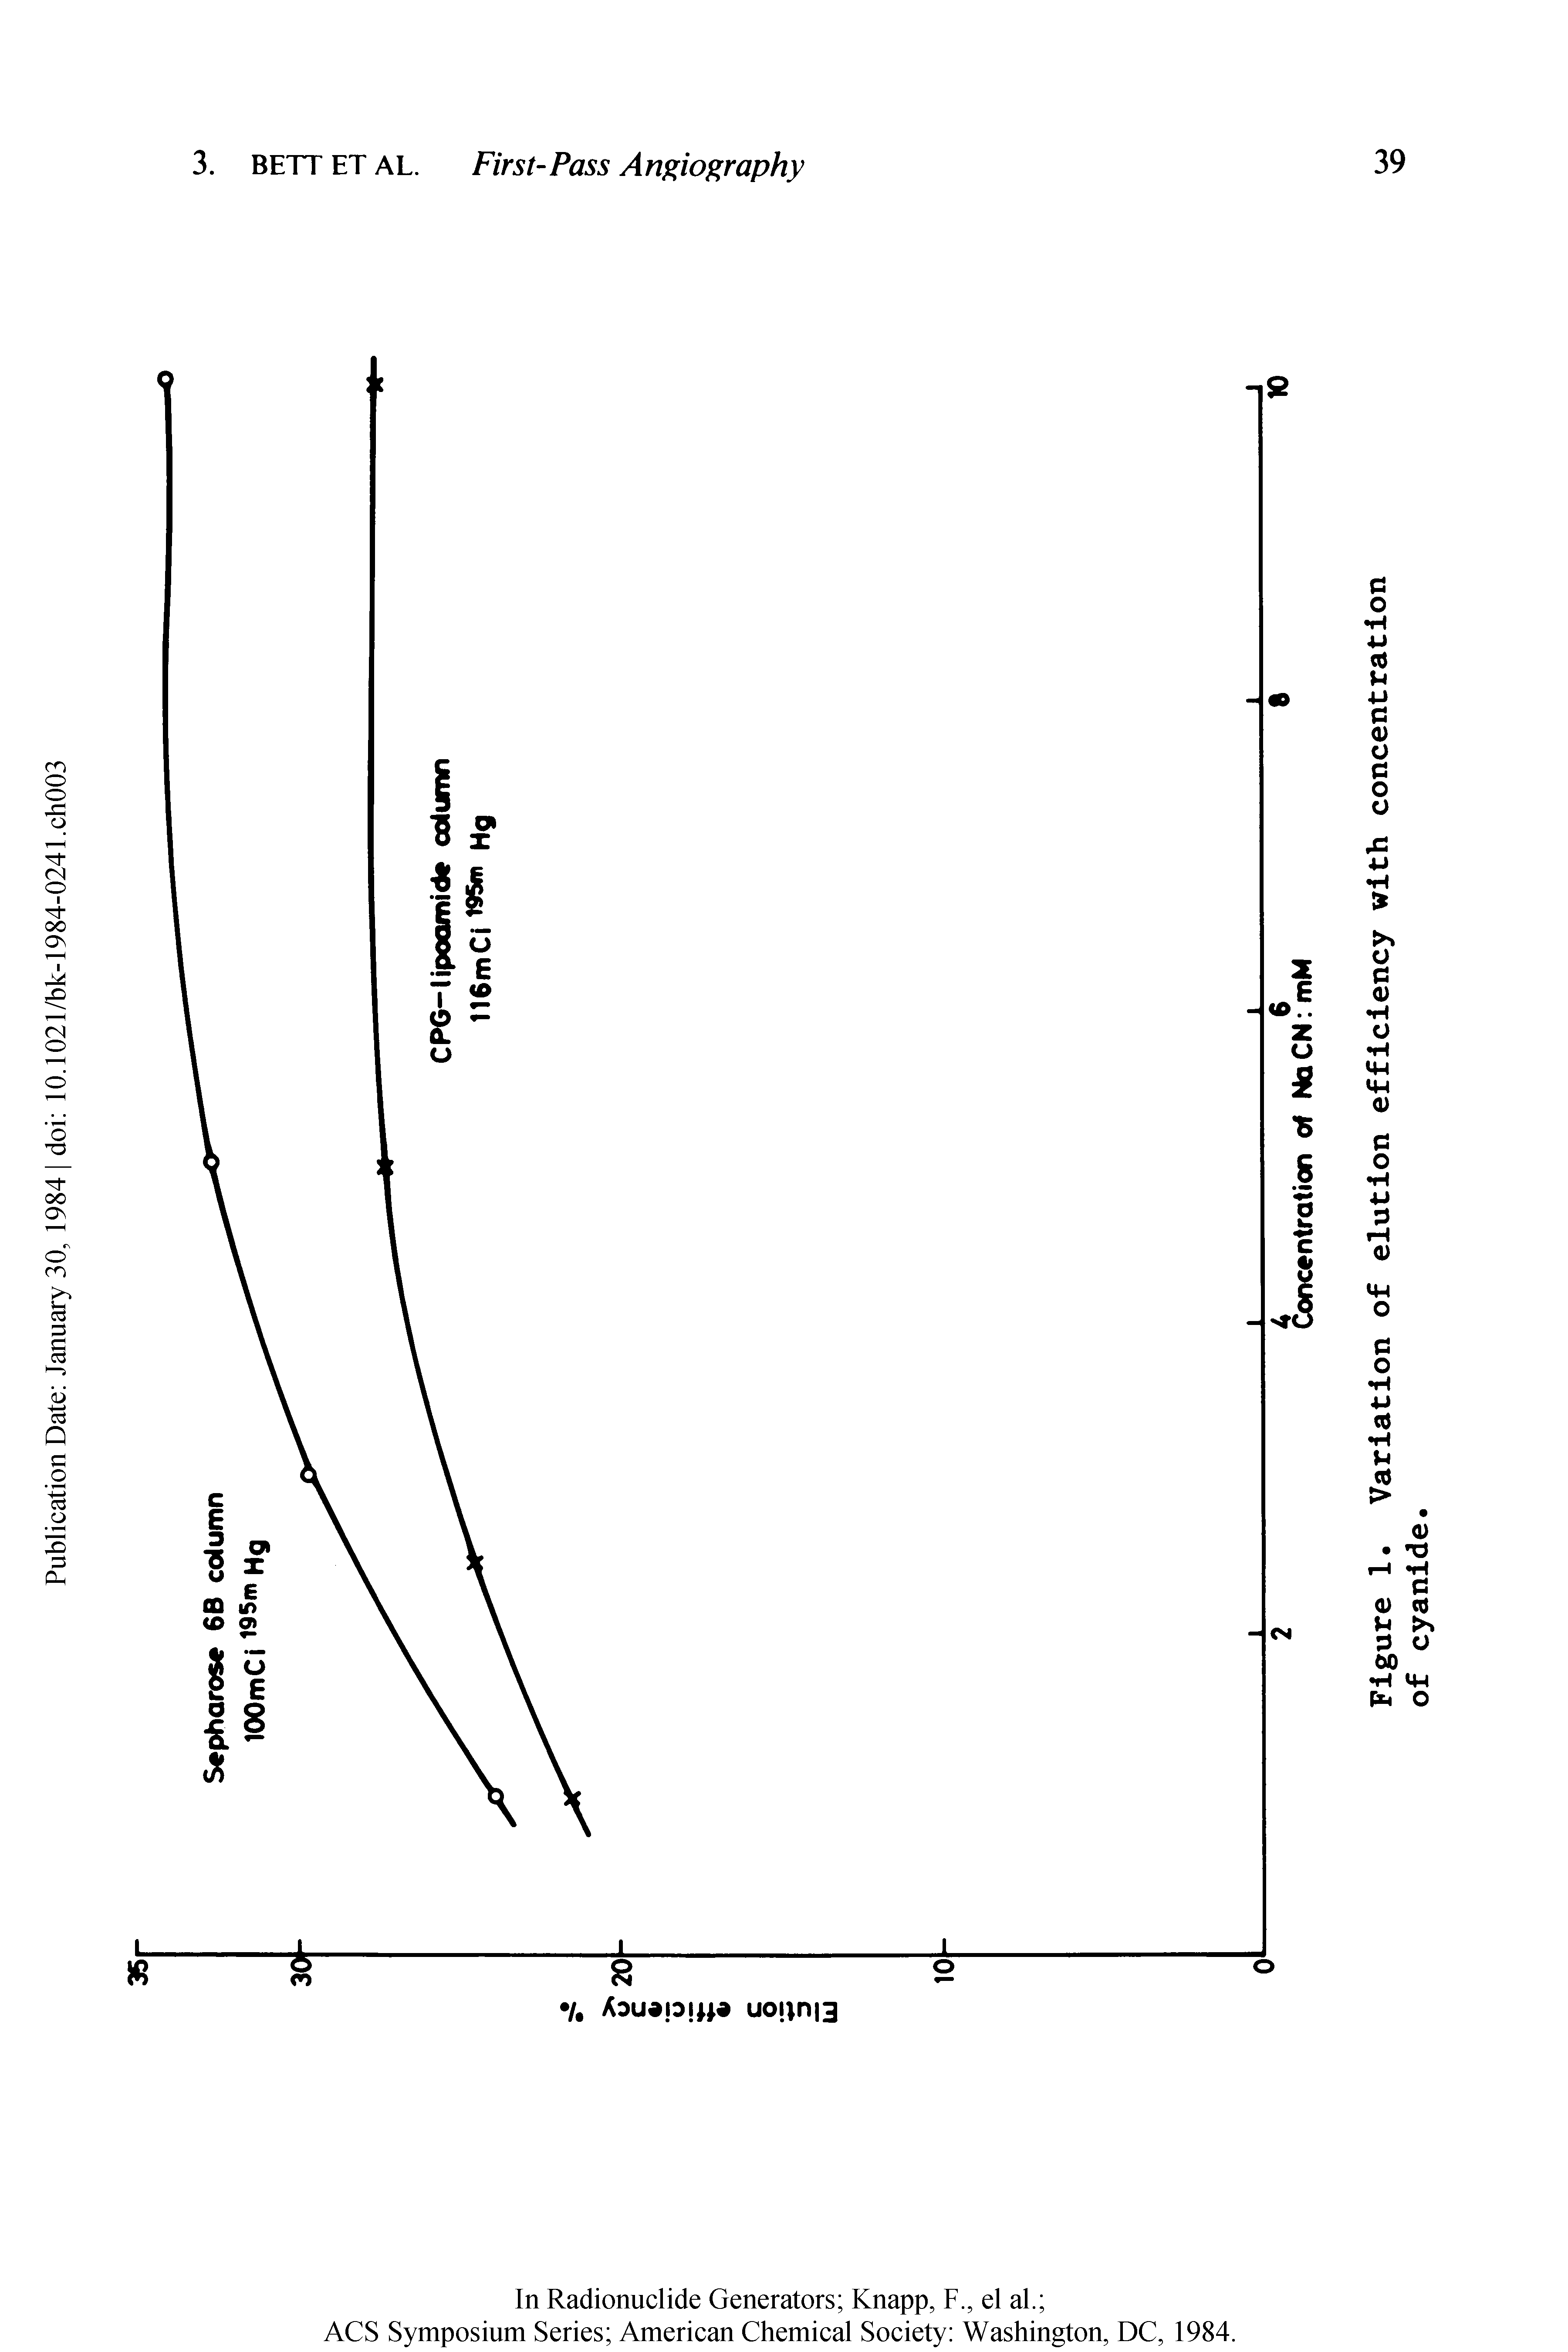 Figure 1. Variation of elution efficiency with concentration of cyanide.